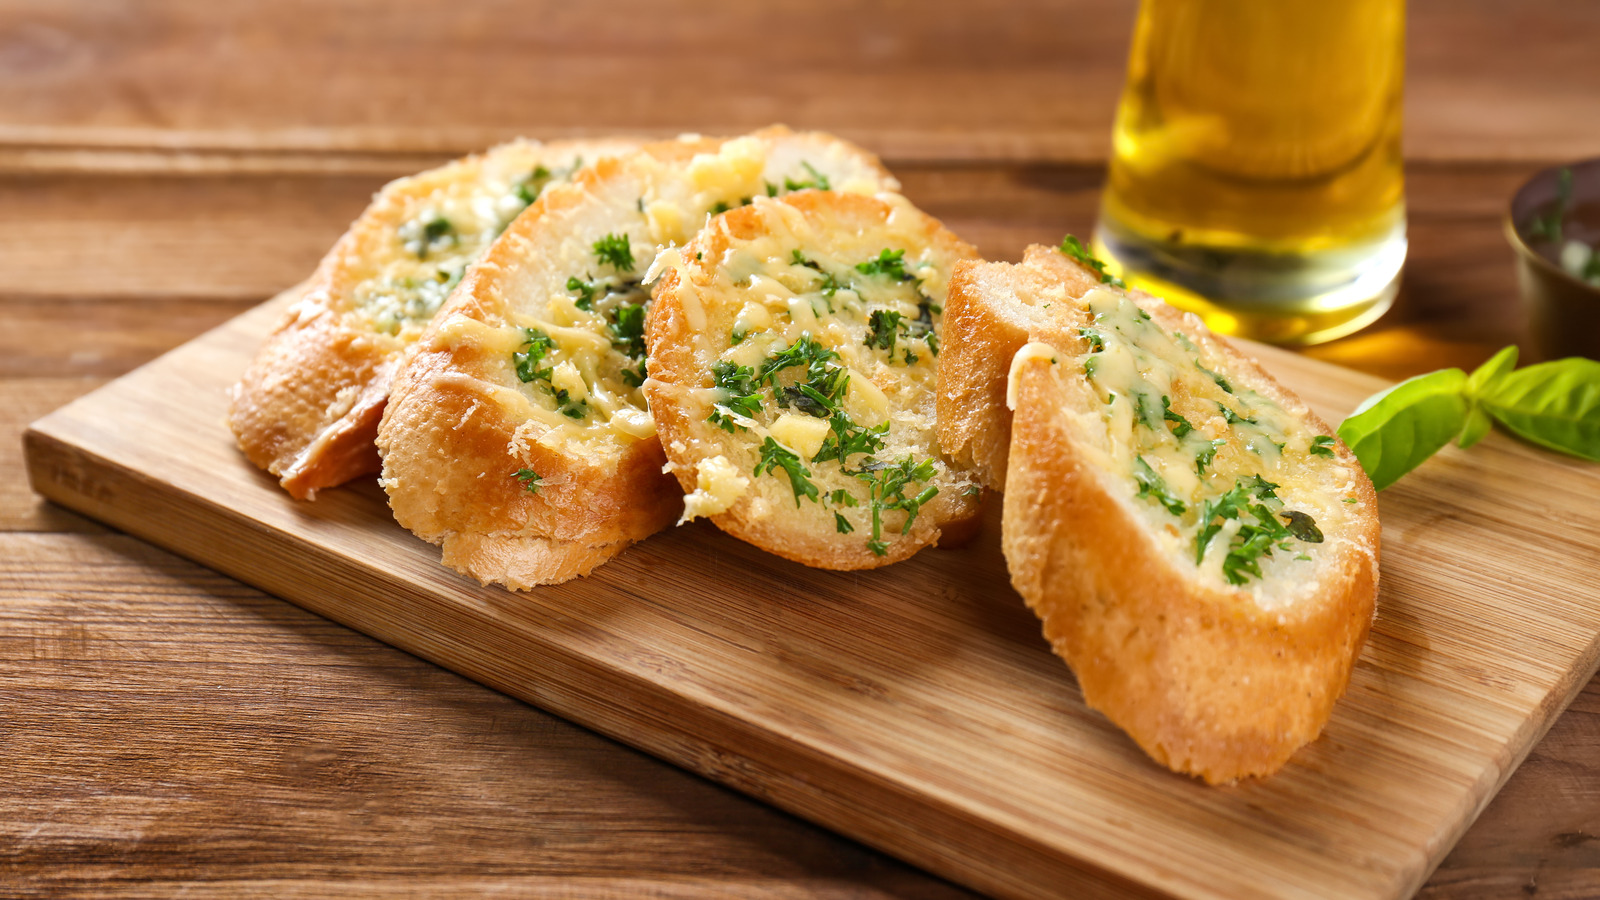 How Long Does Garlic Bread Last In The Freezer? - Tasting Table